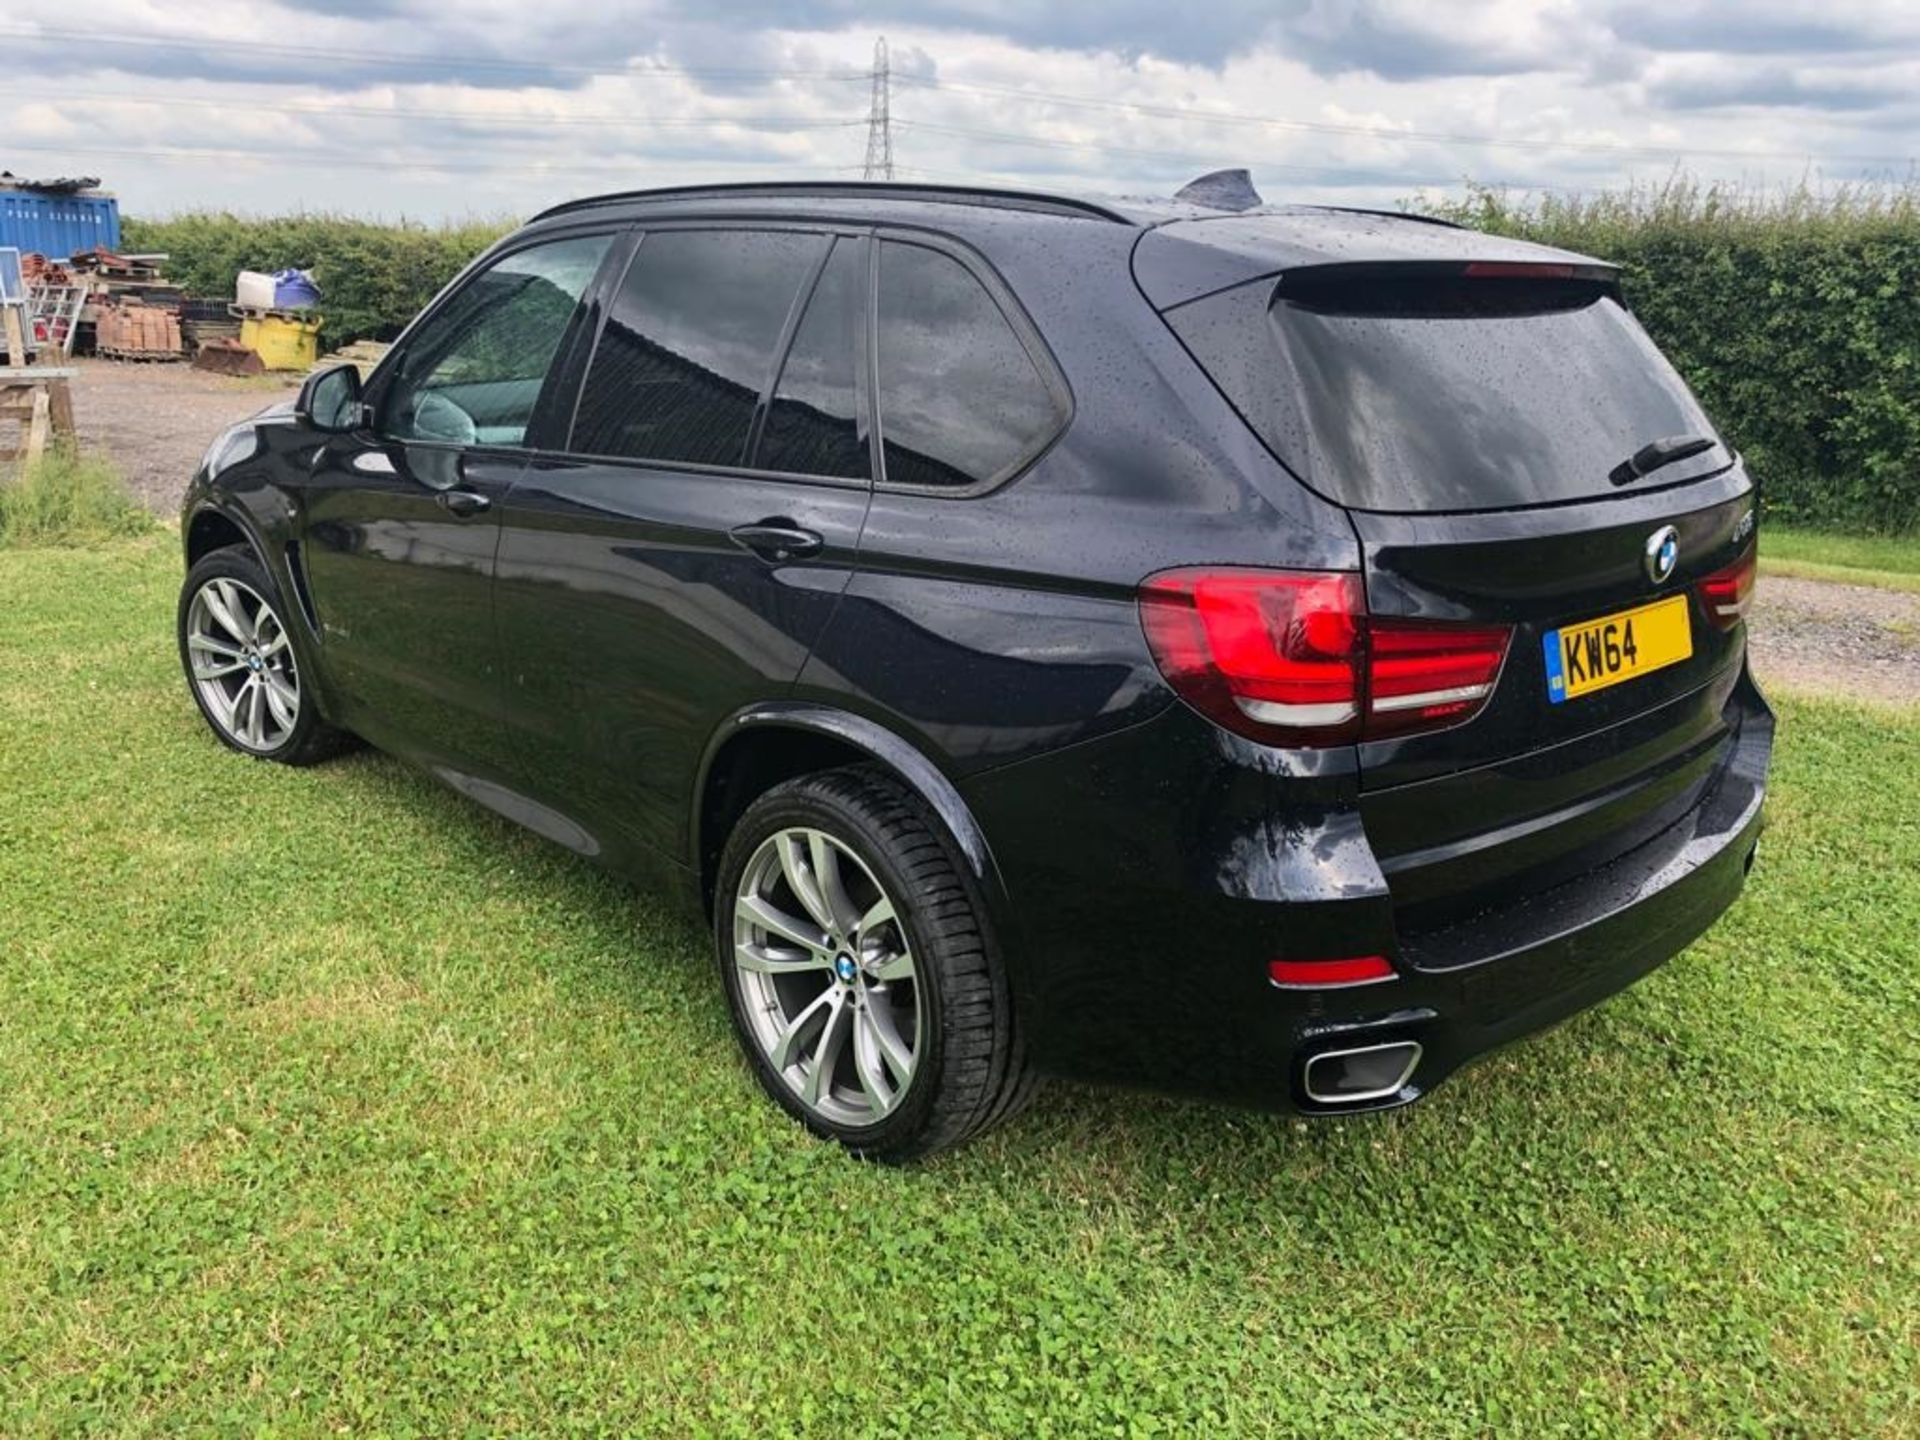 2015/64 REG BMW X5 XDRIVE 40D M SPORT AUTO 3.0 DIESEL, SHOWING 1 OWNER FROM NEW *NO VAT* - Image 4 of 21